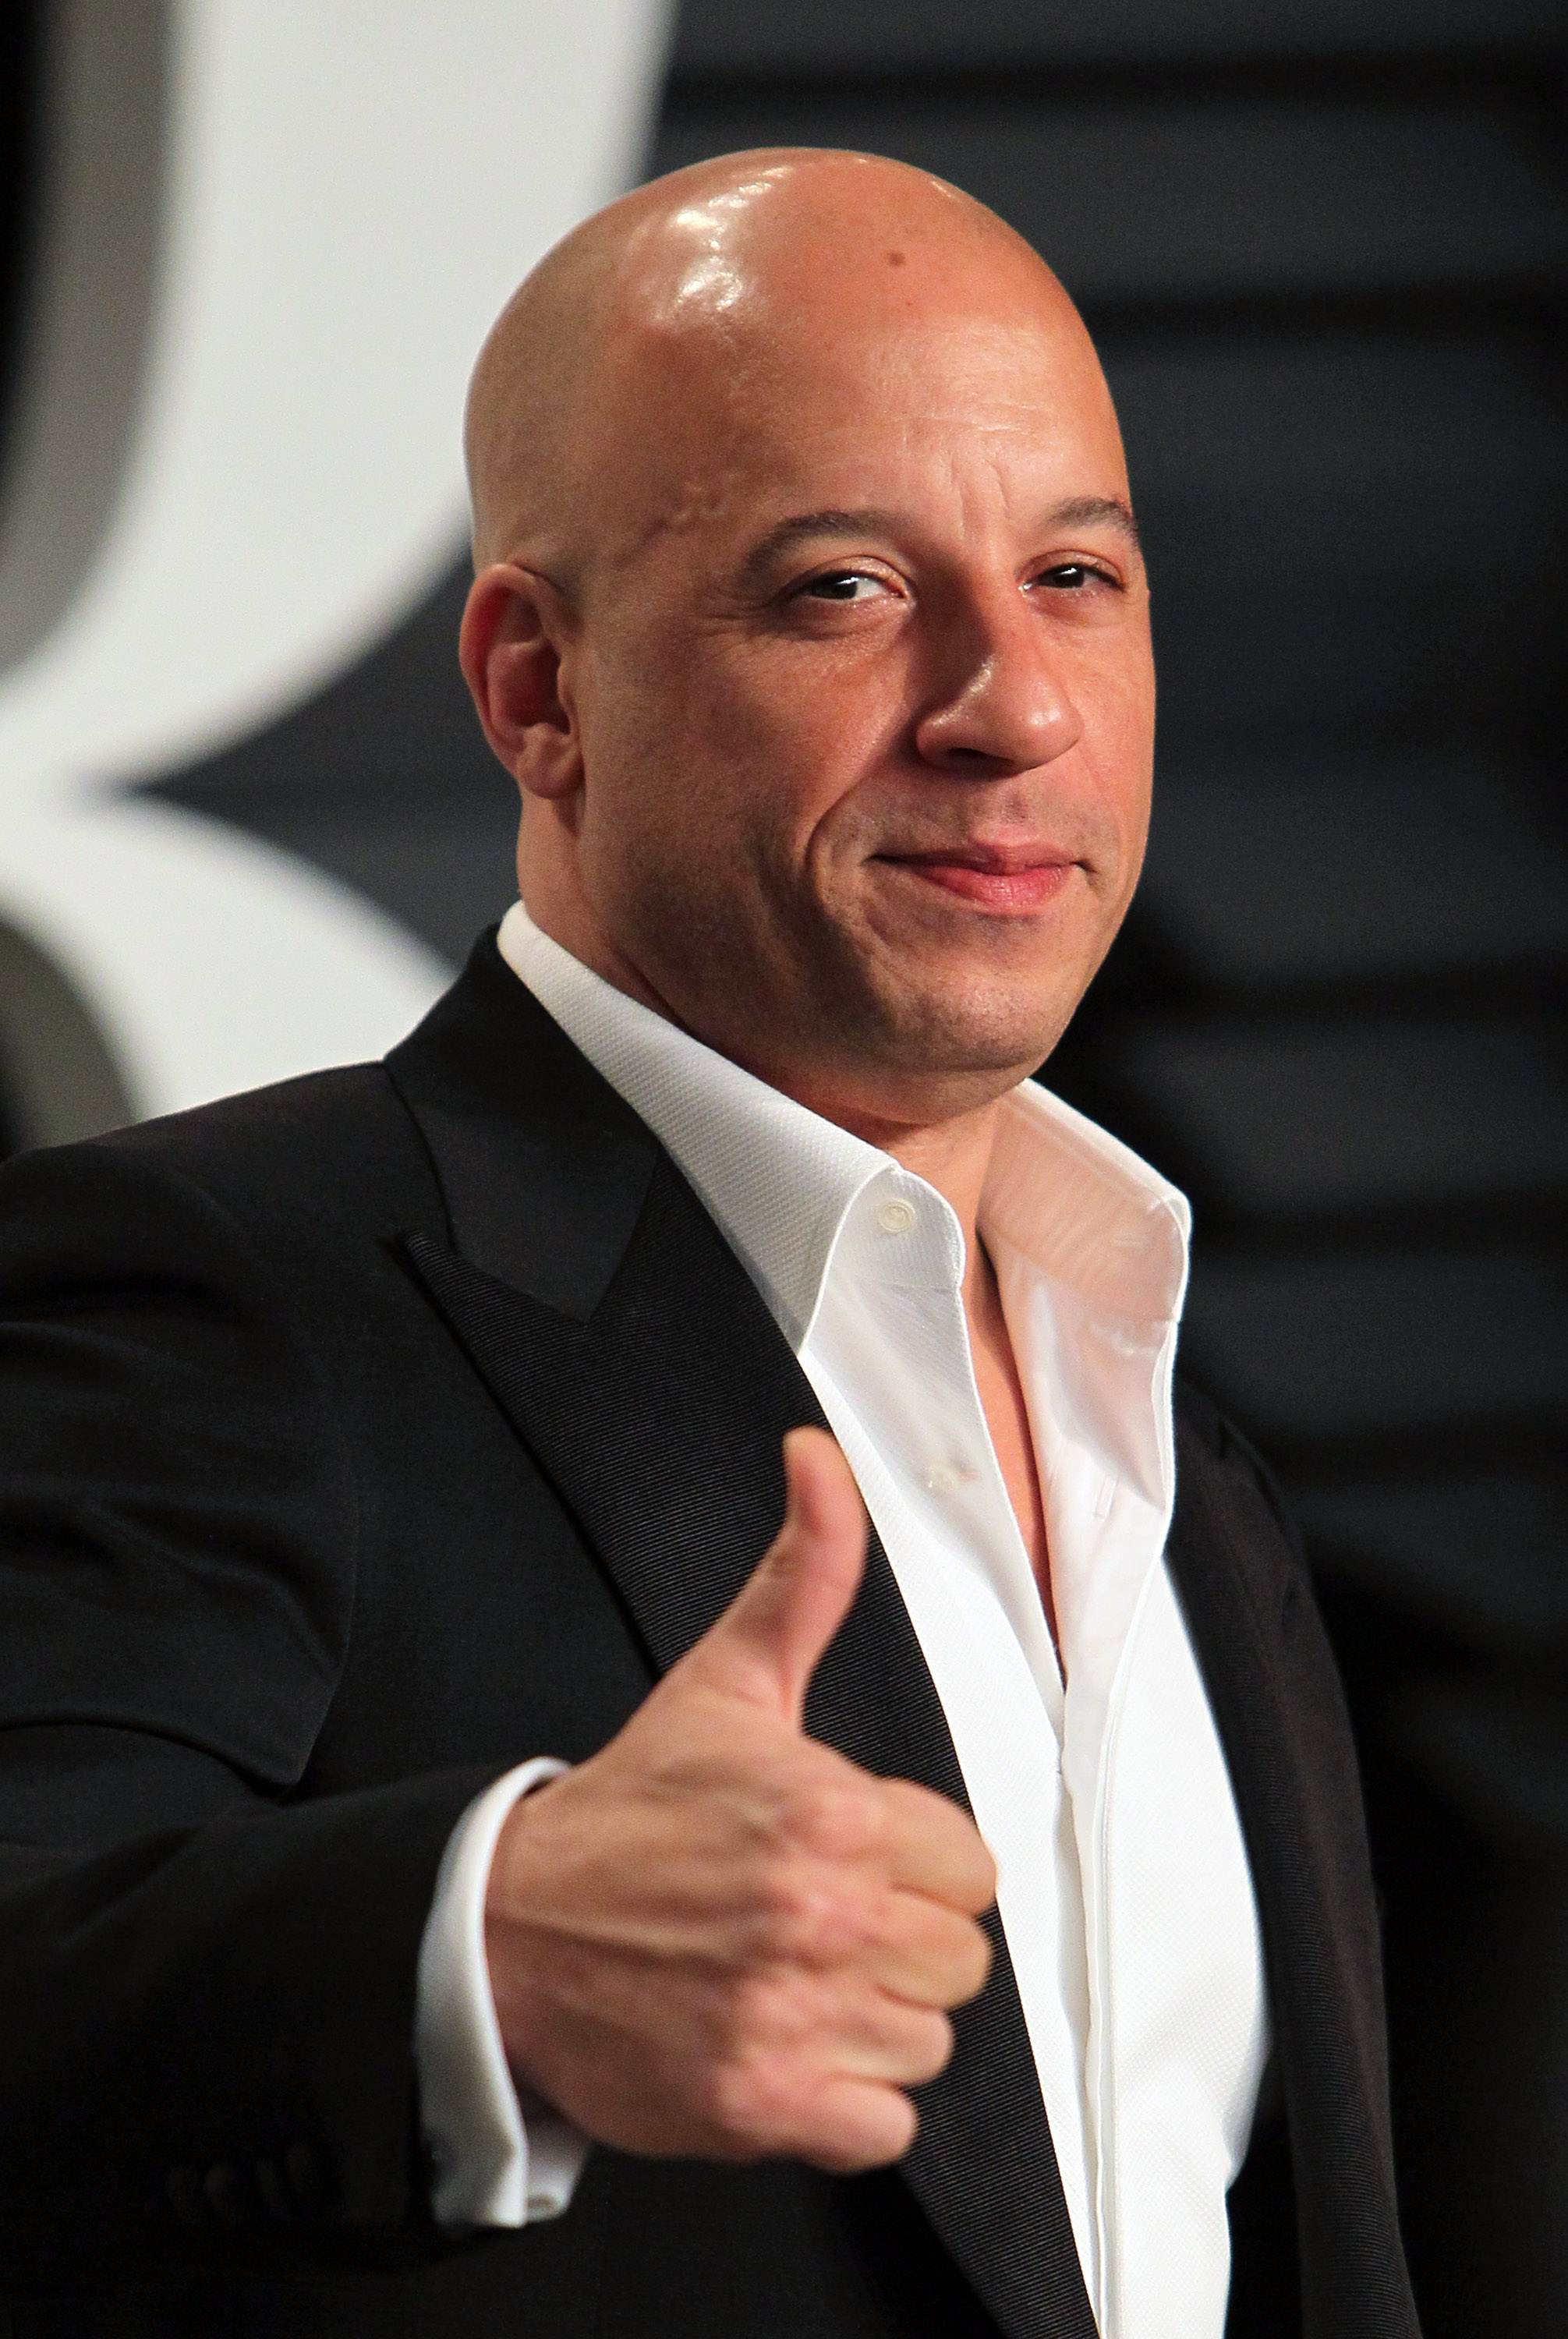 Actor Vin Diesel attends the 2015 Vanity Fair Oscar Party hosted by Graydon Carter at the Wallis Annenberg Center for the Performing Arts on Feb. 22, 2015 in Beverly Hills.